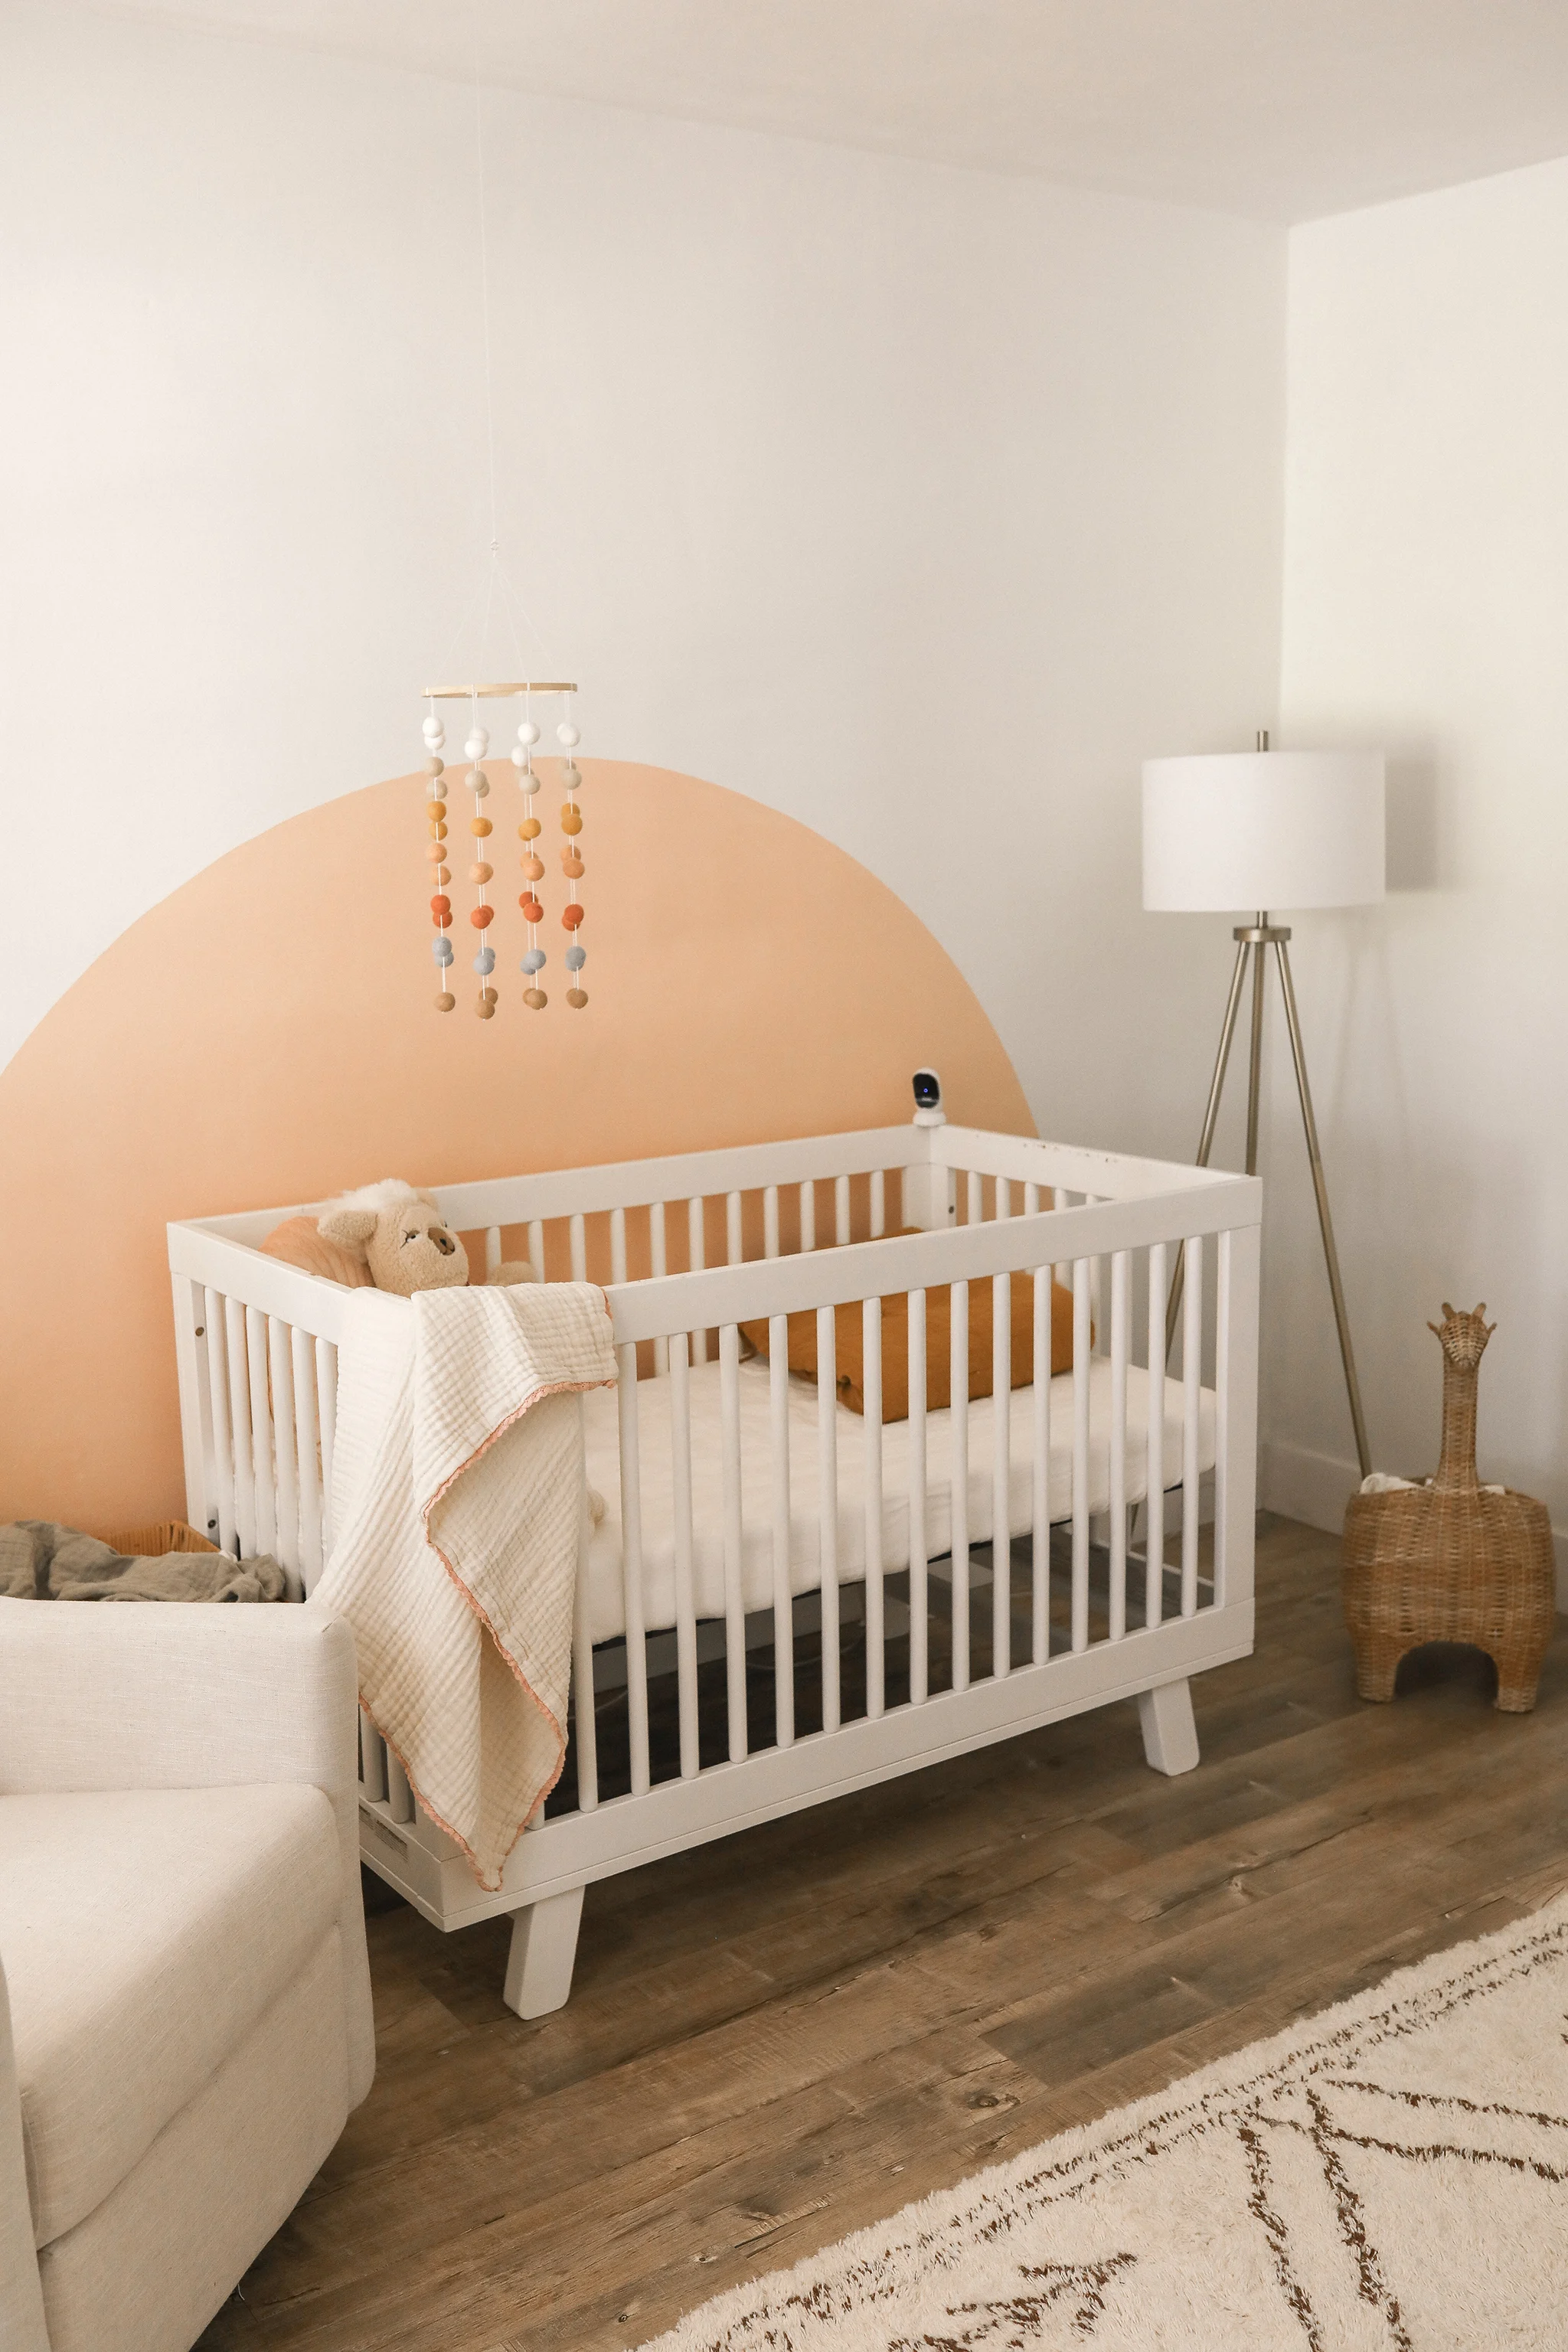 Peach Nursery with Painted Arch behind the Crib designed by Tayler Golden